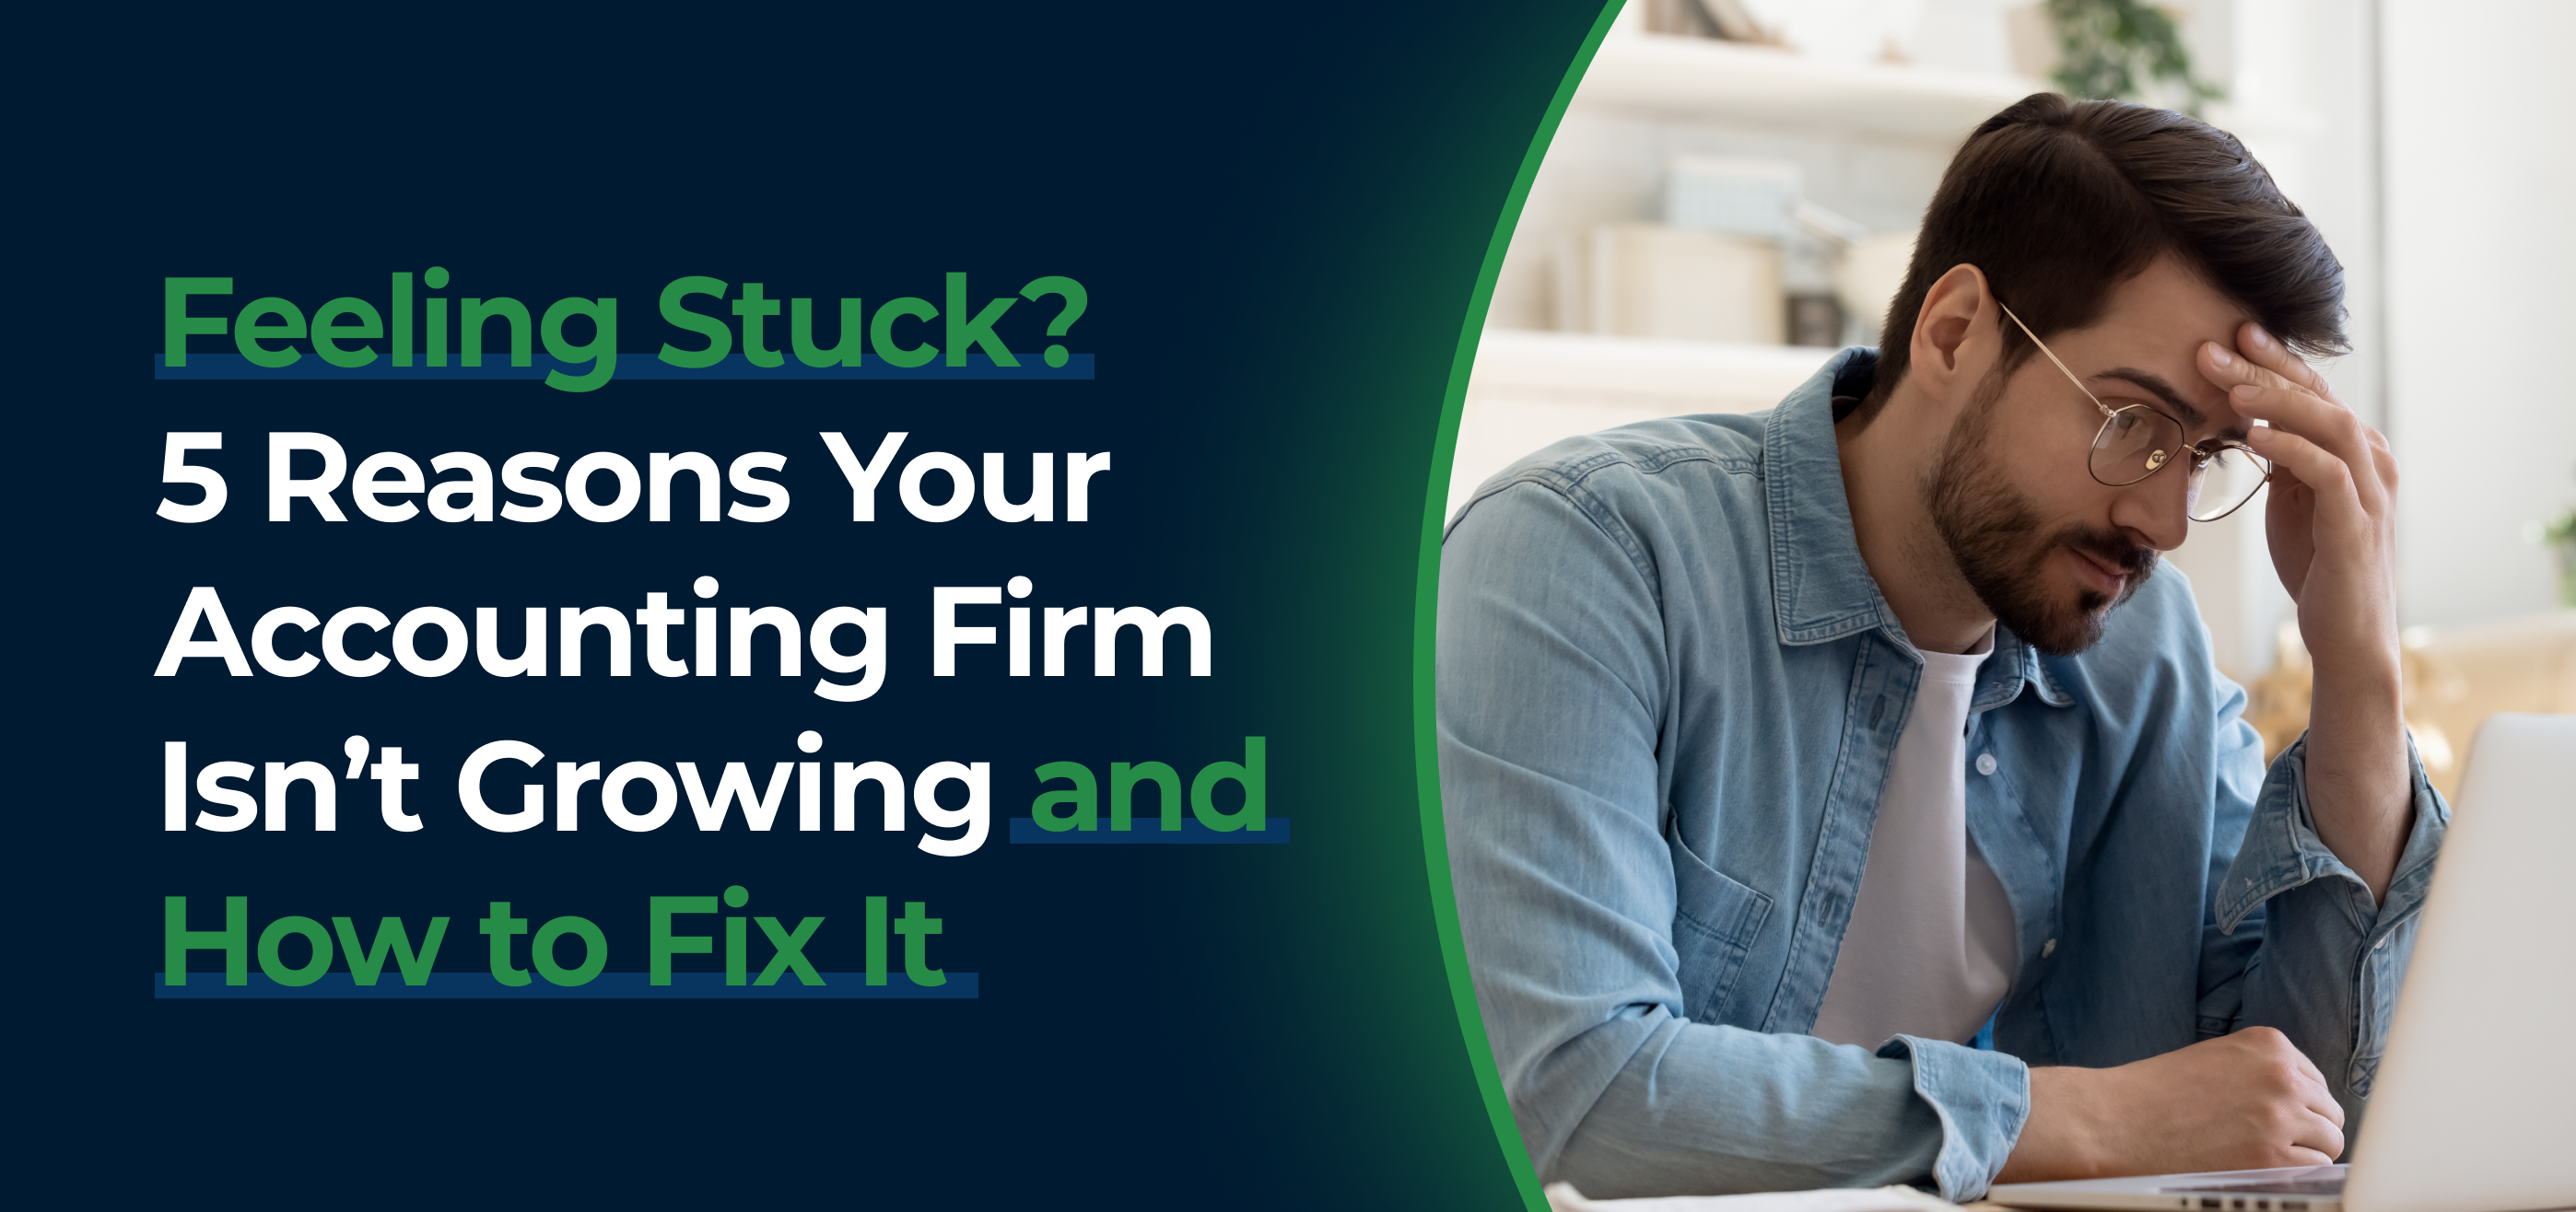 cover image for feeling stuck? 5 reasons your accounting firm isn't growing and how to fix it